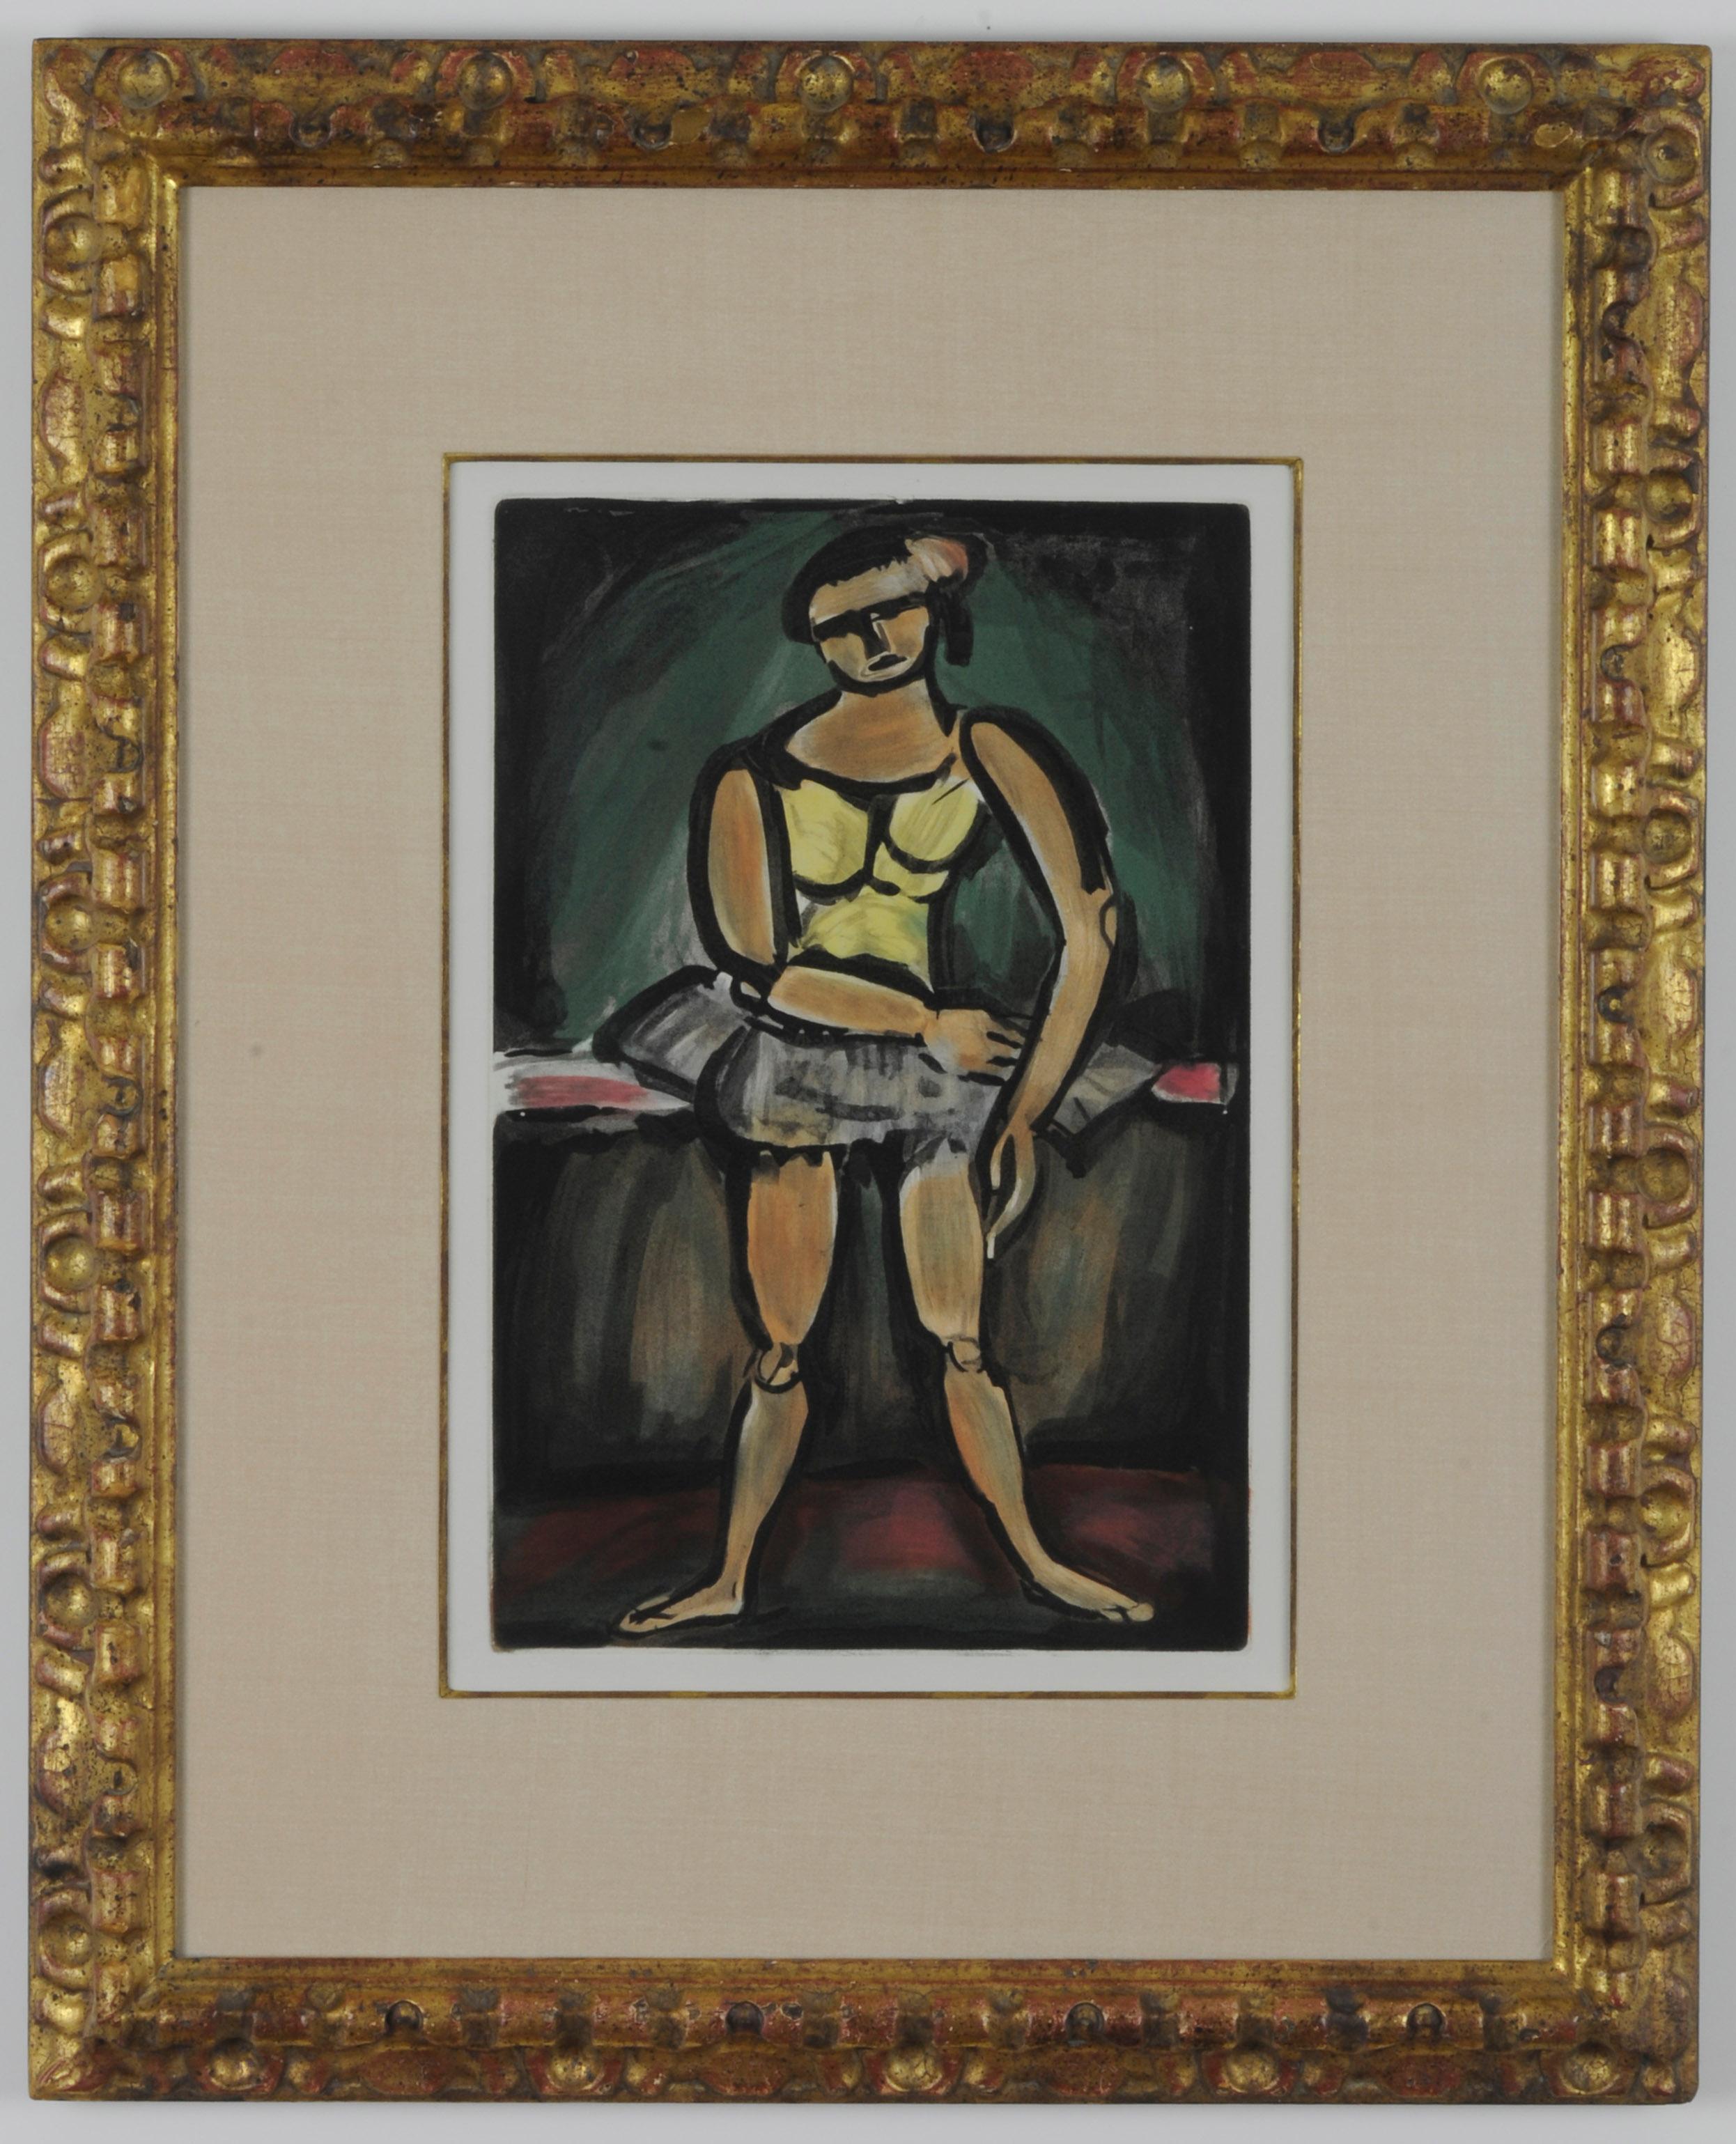 Georges Rouault - Ballerine (Ballerina) For Sale at 1stDibs